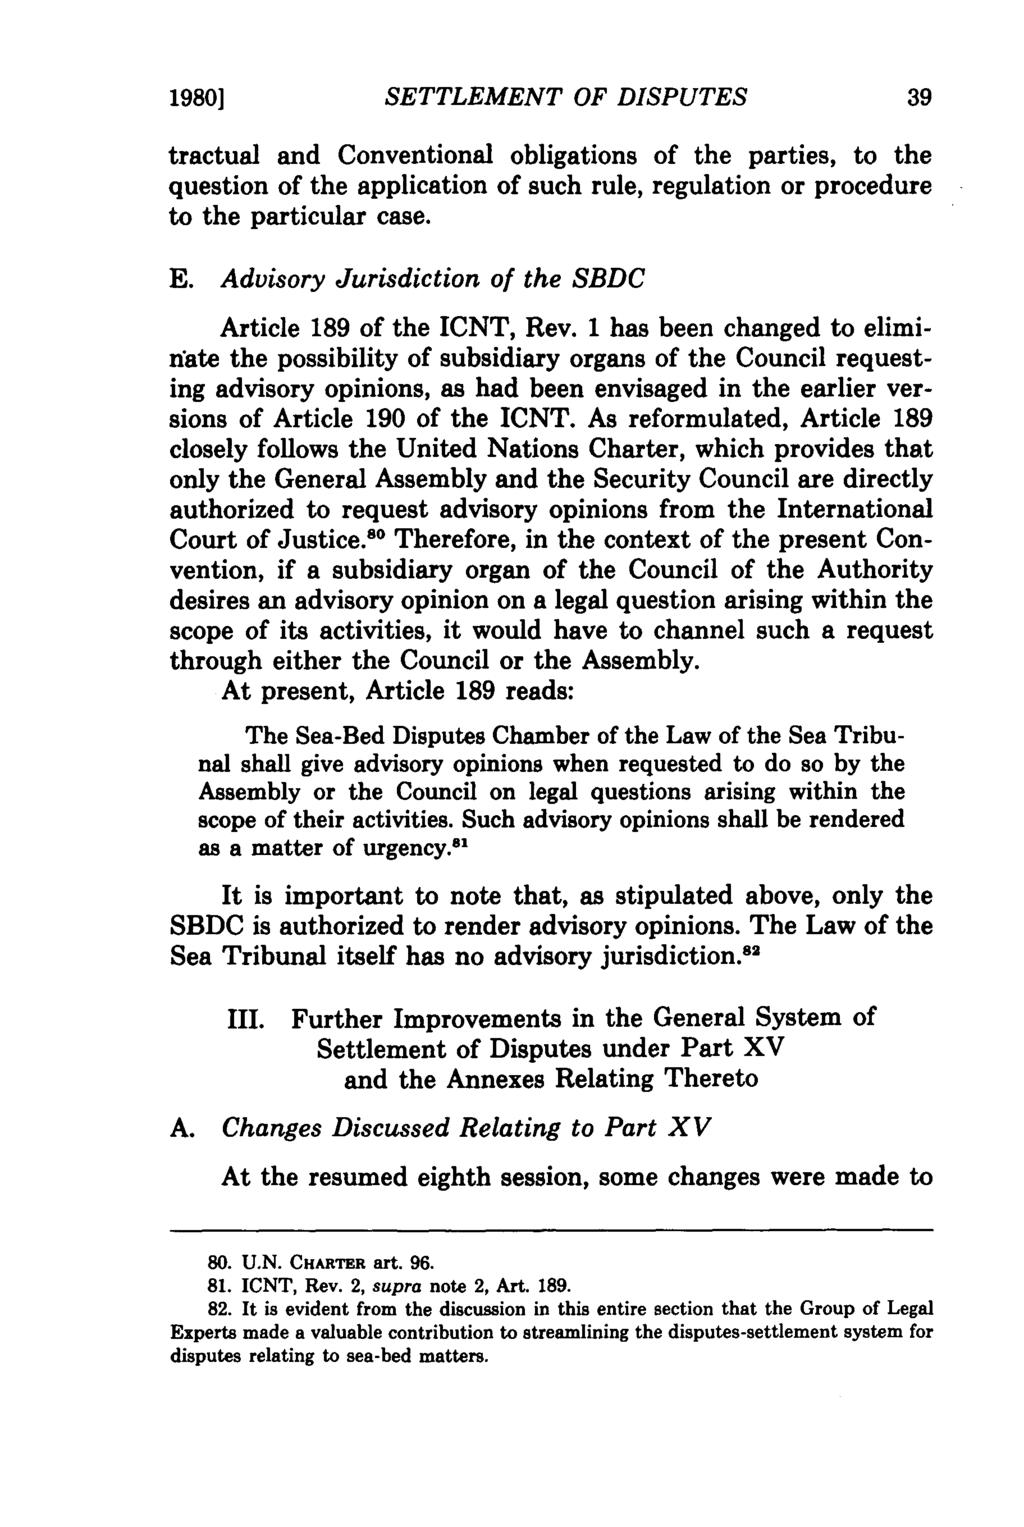 1980] SETTLEMENT OF DISPUTES tractual and Conventional obligations of the parties, to the question of the application of such rule, regulation or procedure to the particular case. E.